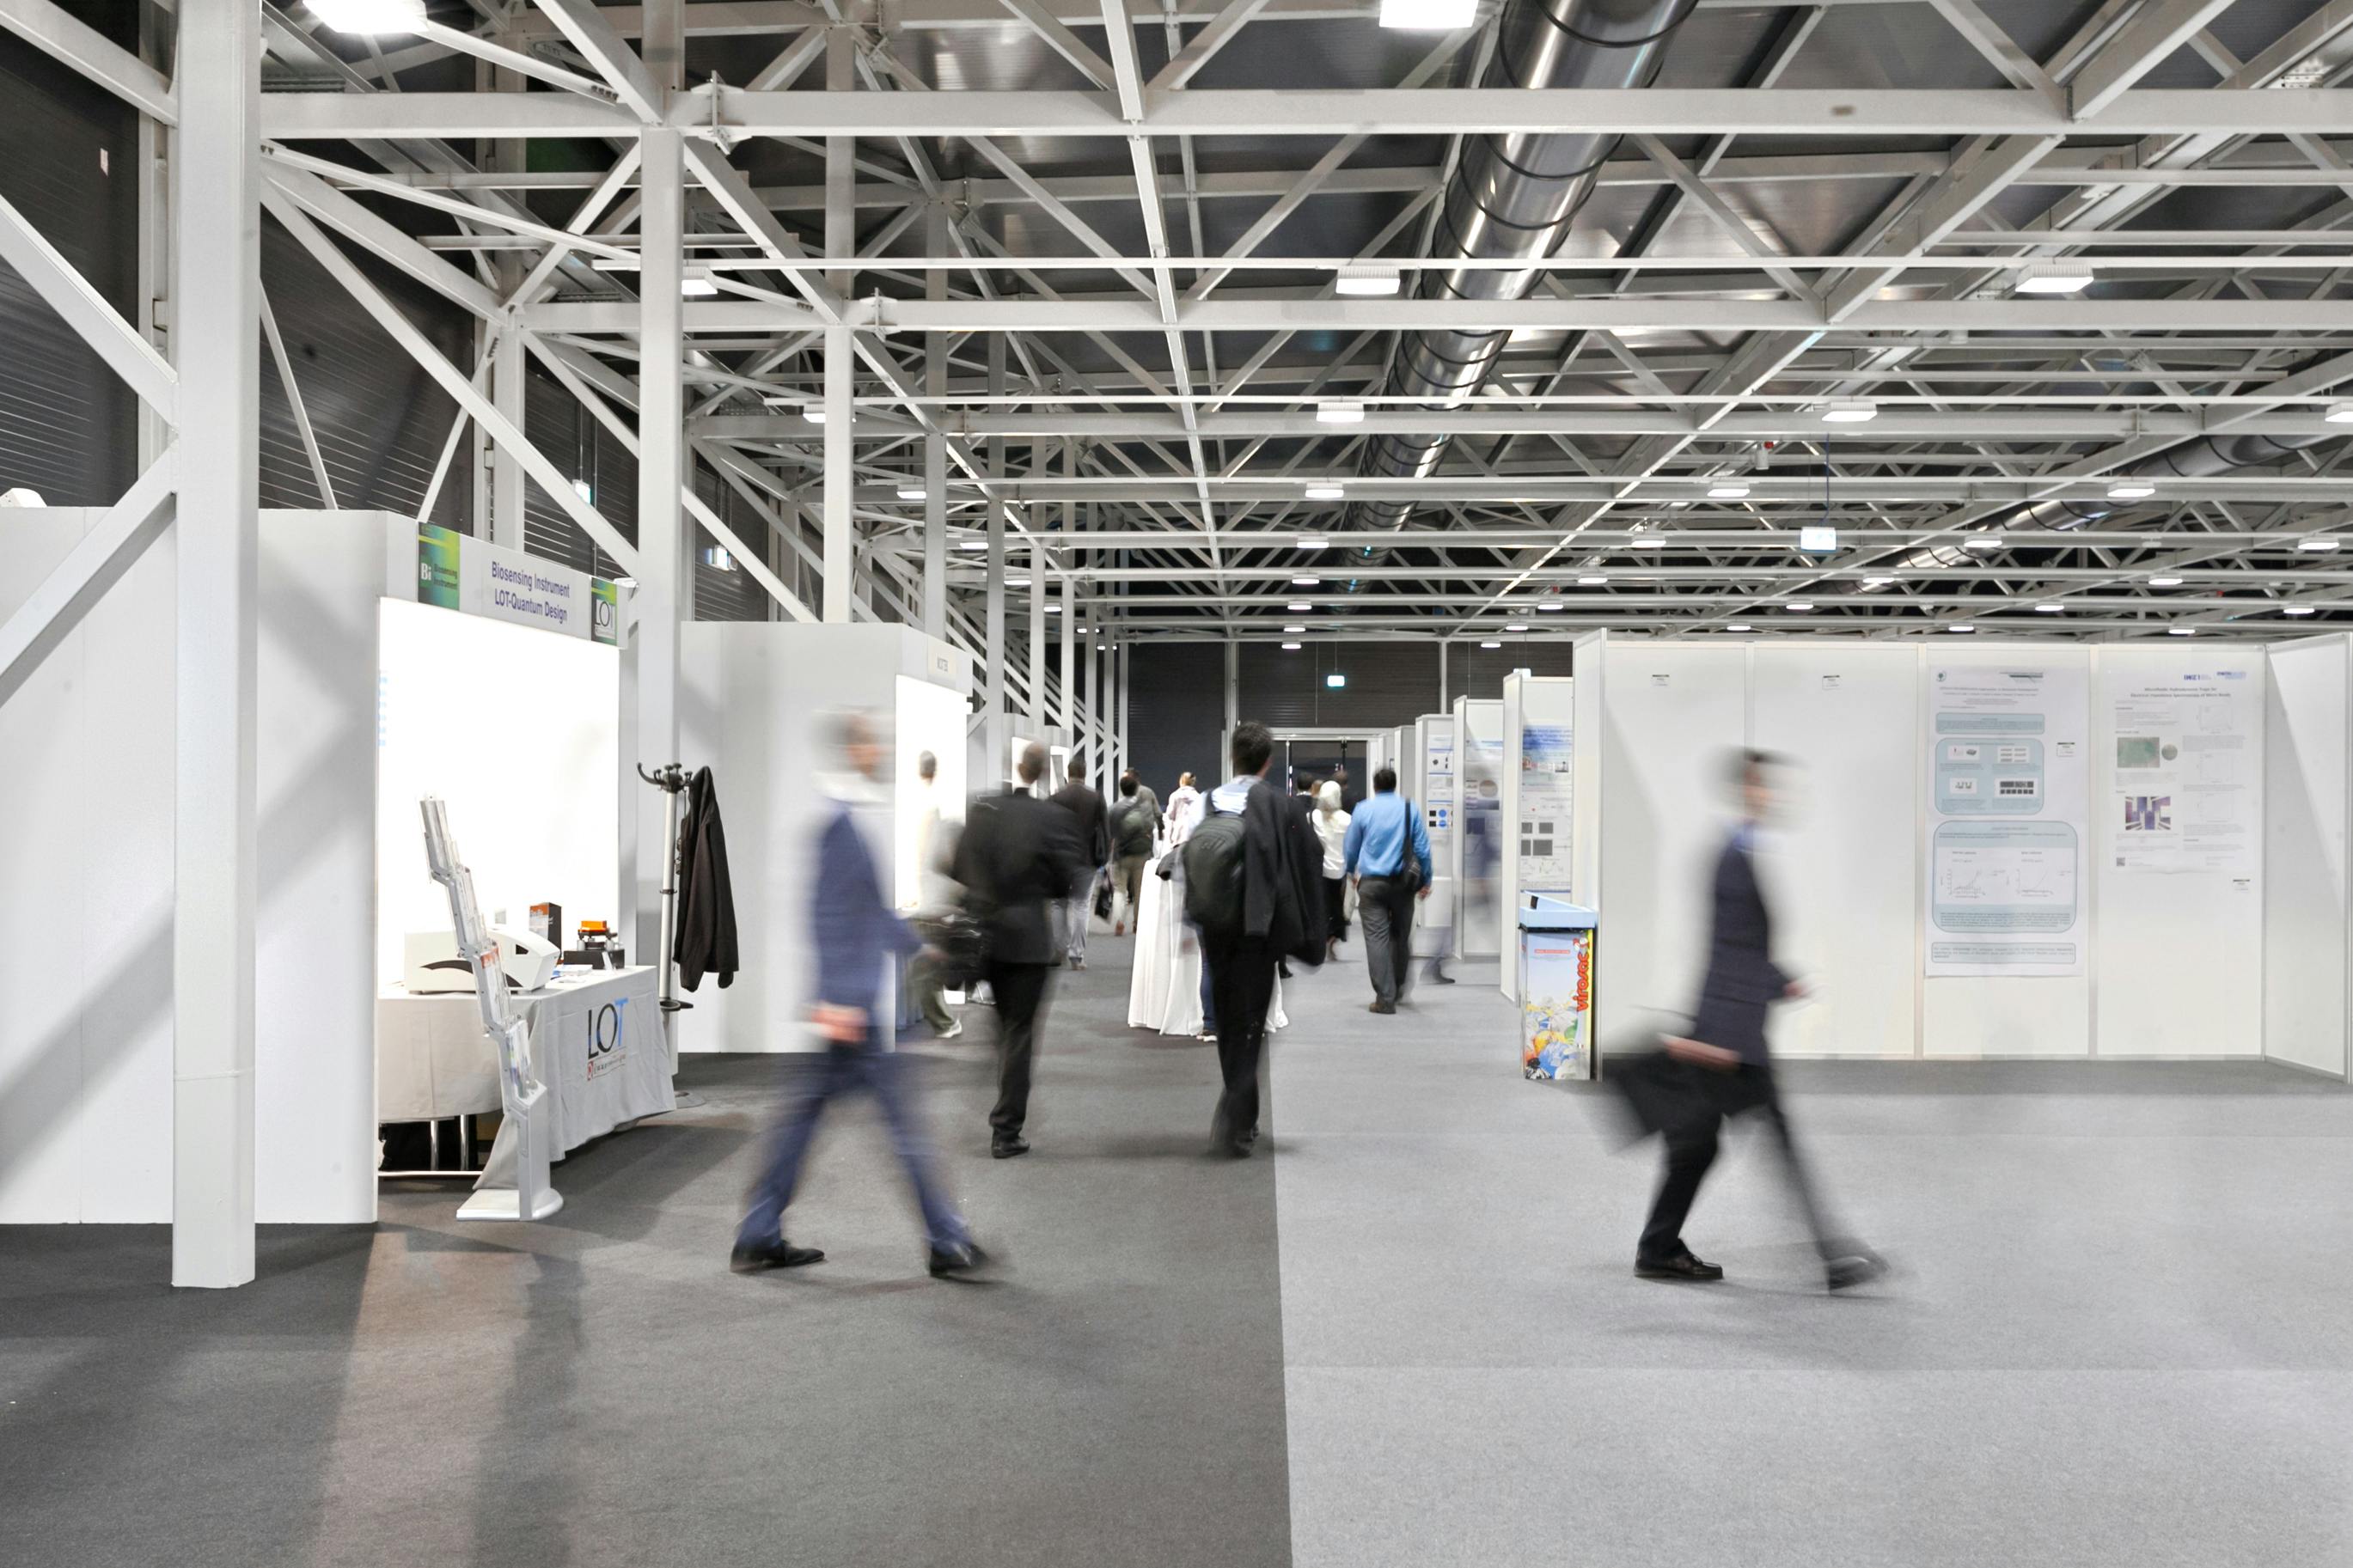 Exhibition hall with stands and people on the move